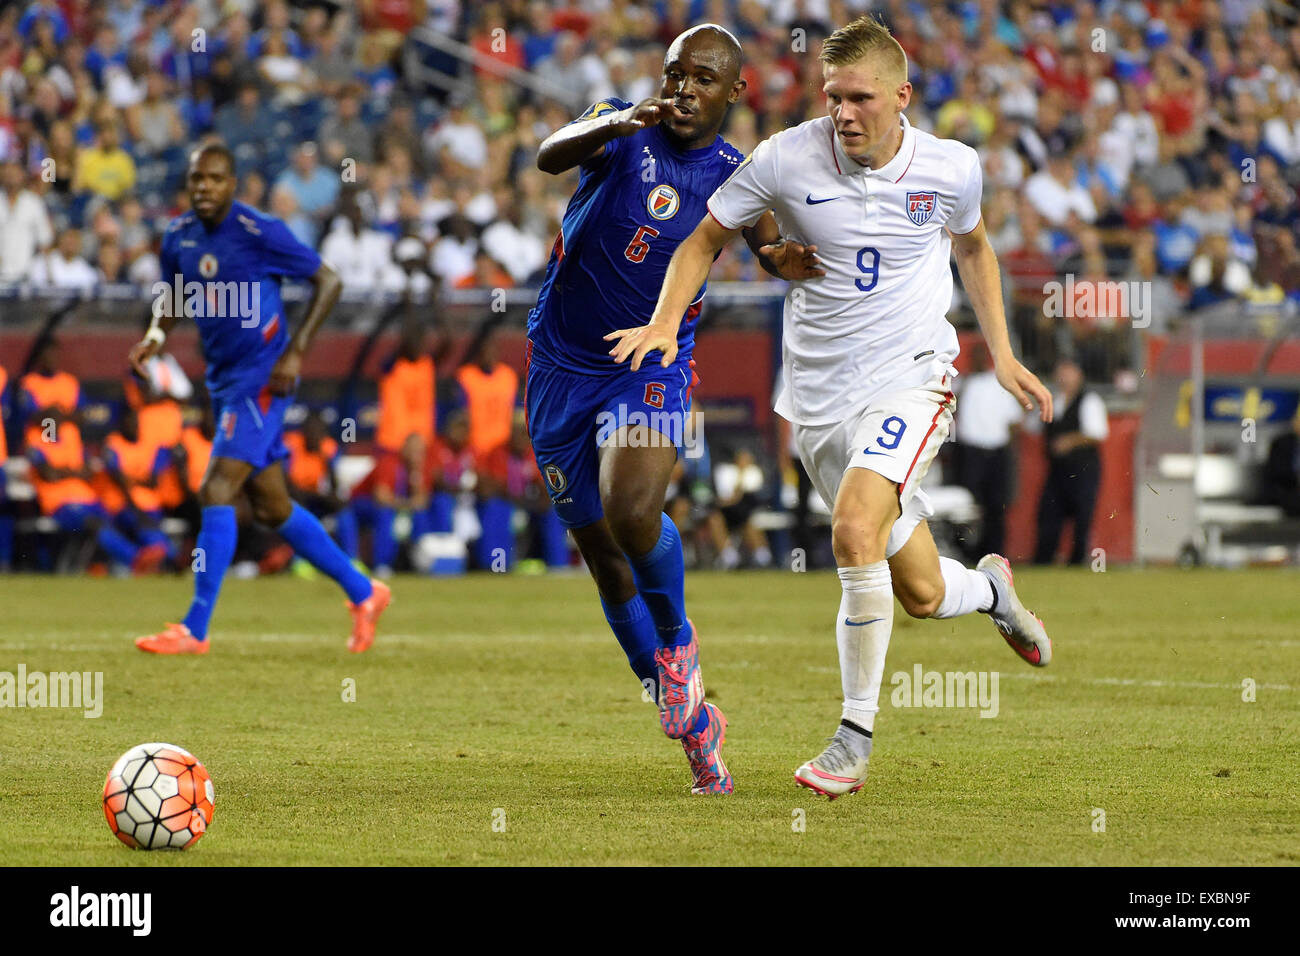 Foxborough, Massachusetts, USA. 10th July, 2015. Haiti defender Frantz Bertin (6) and United States forward Aron Johannsson (9) battle on the pitch for control of the ball during the CONCACAF Gold Cup group stage match between USA and Haiti held at Gillette Stadium, in Foxborough Massachusetts. USA defeated Haiti 1-0. Eric Canha/CSM/Alamy Live News/ Alamy Live News Stock Photo